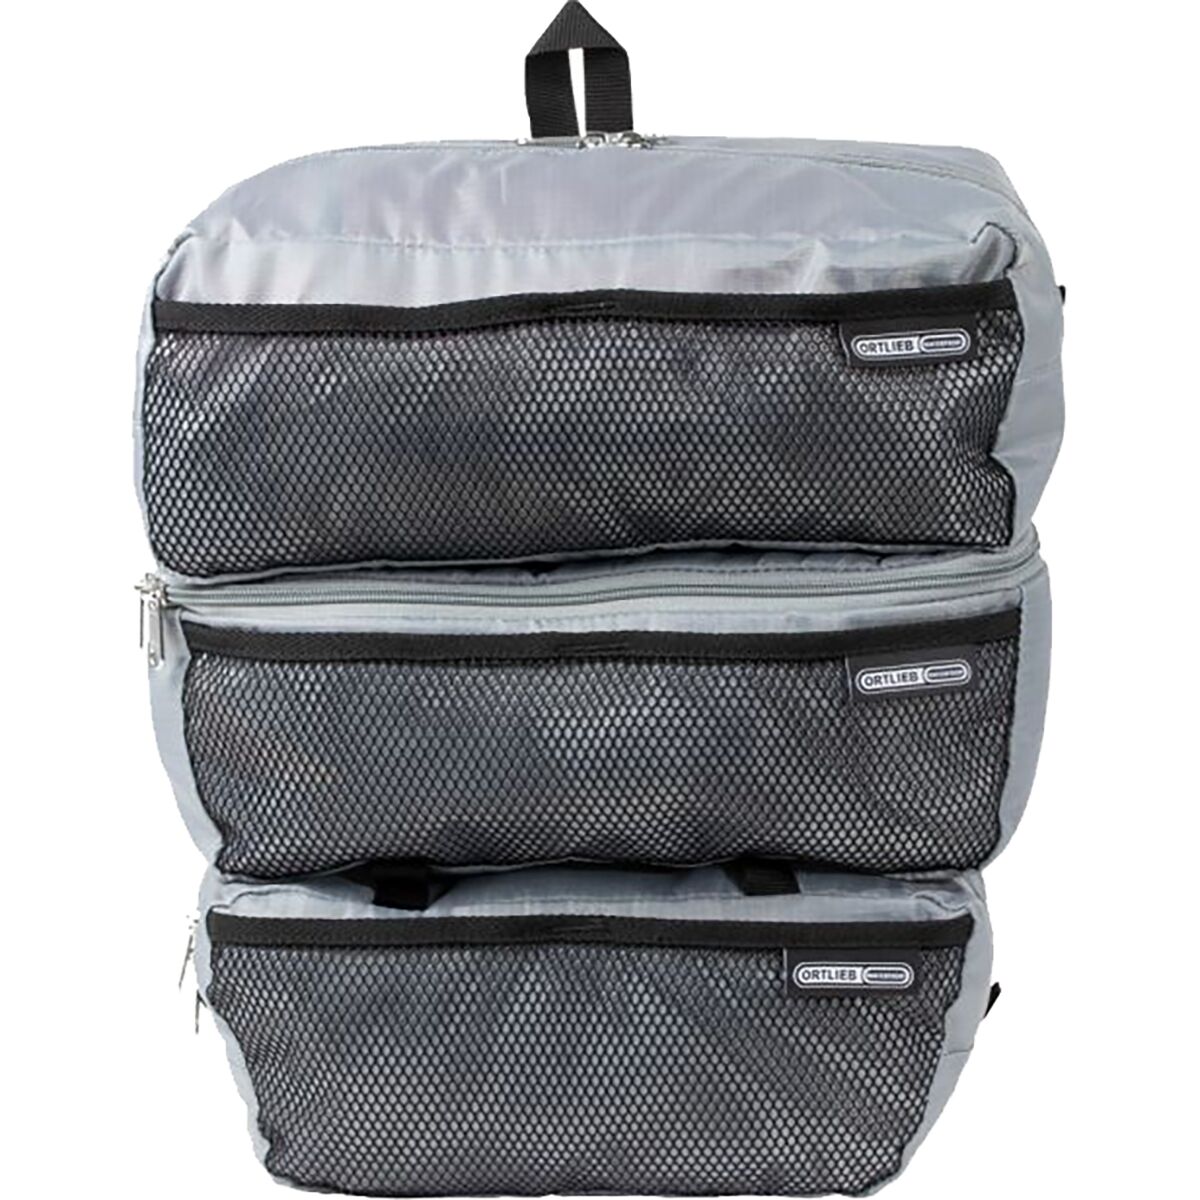 Ortlieb Pannier Packing Cubes